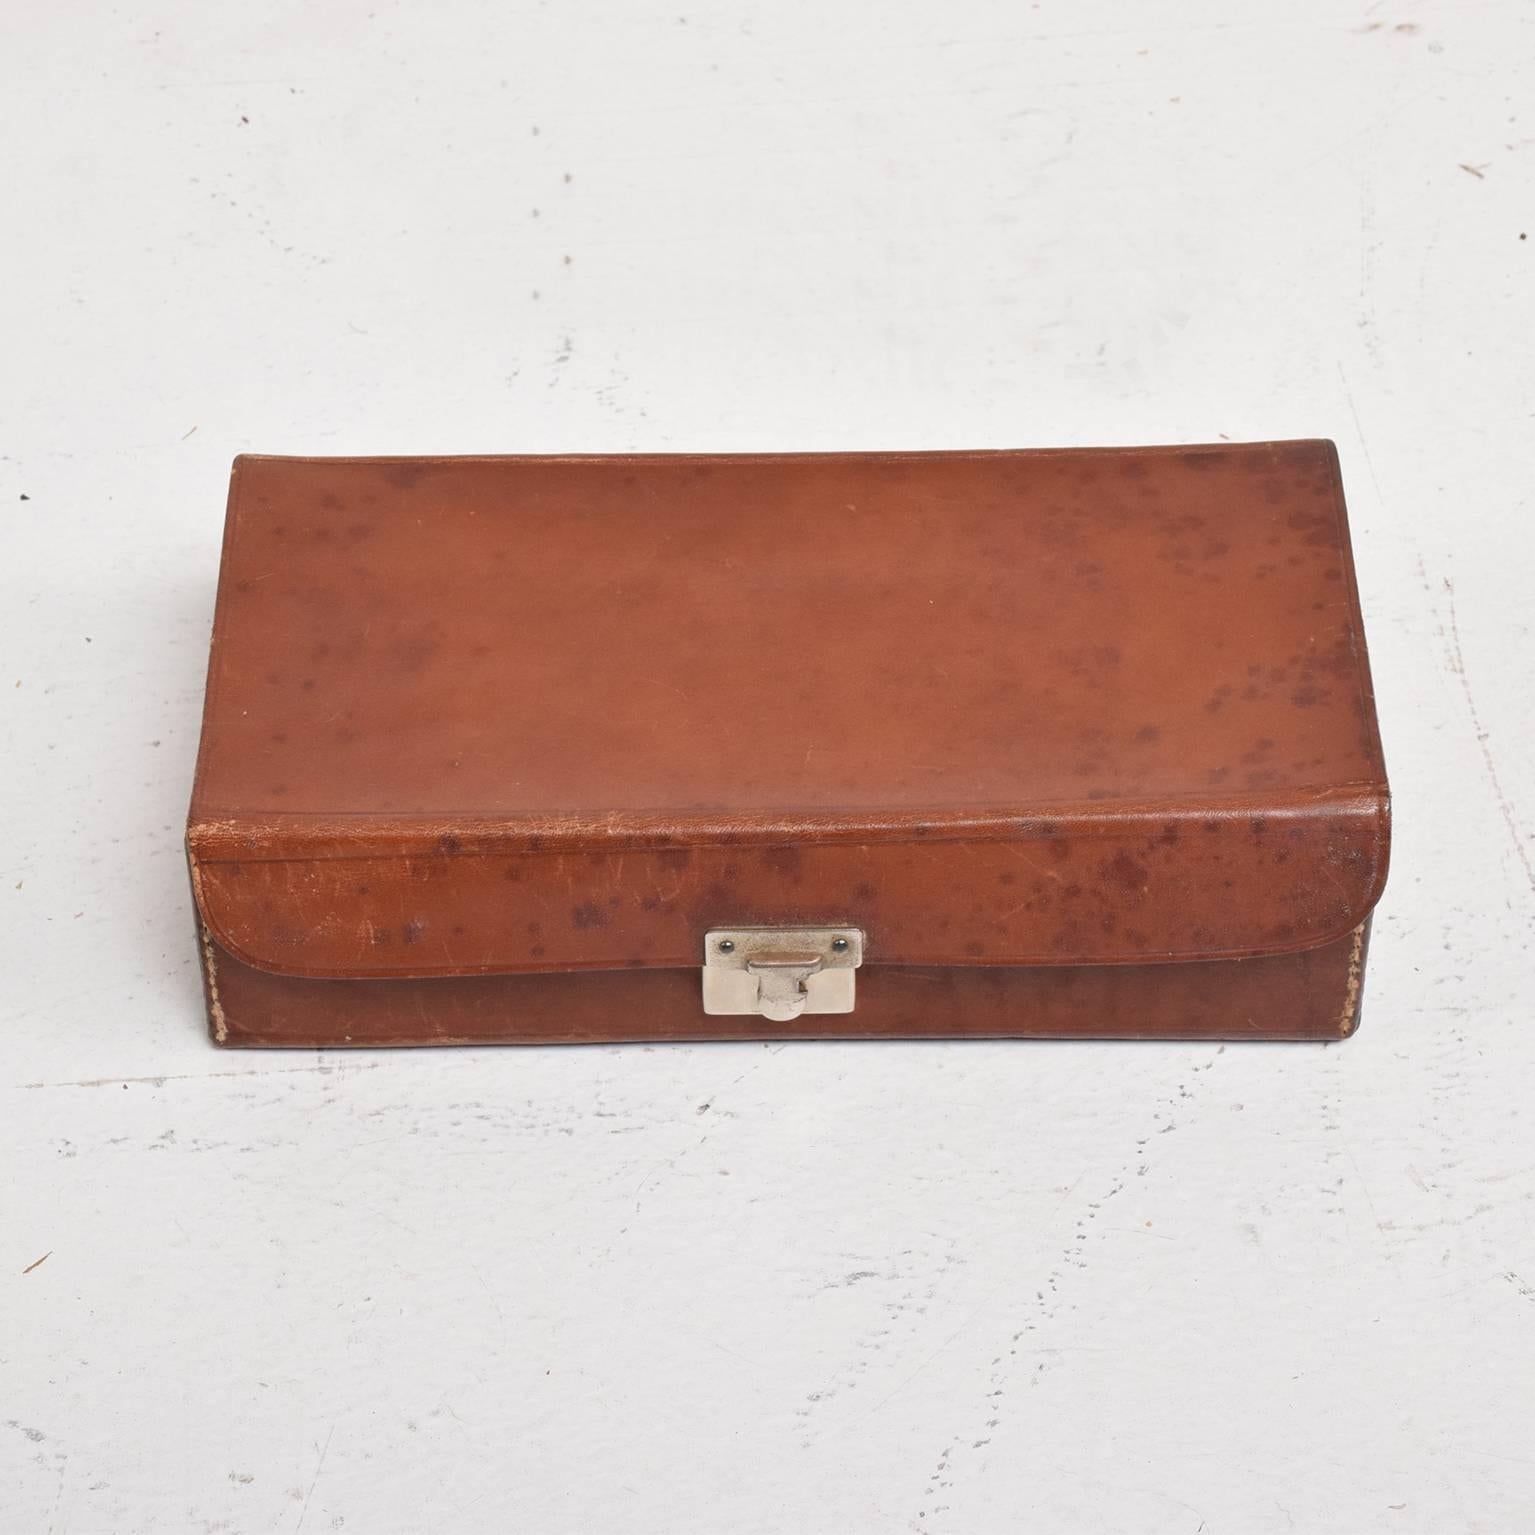 For your consideration, a Mid-Century Modern saddle leather box with lock.
Dimensions: 5 1/2